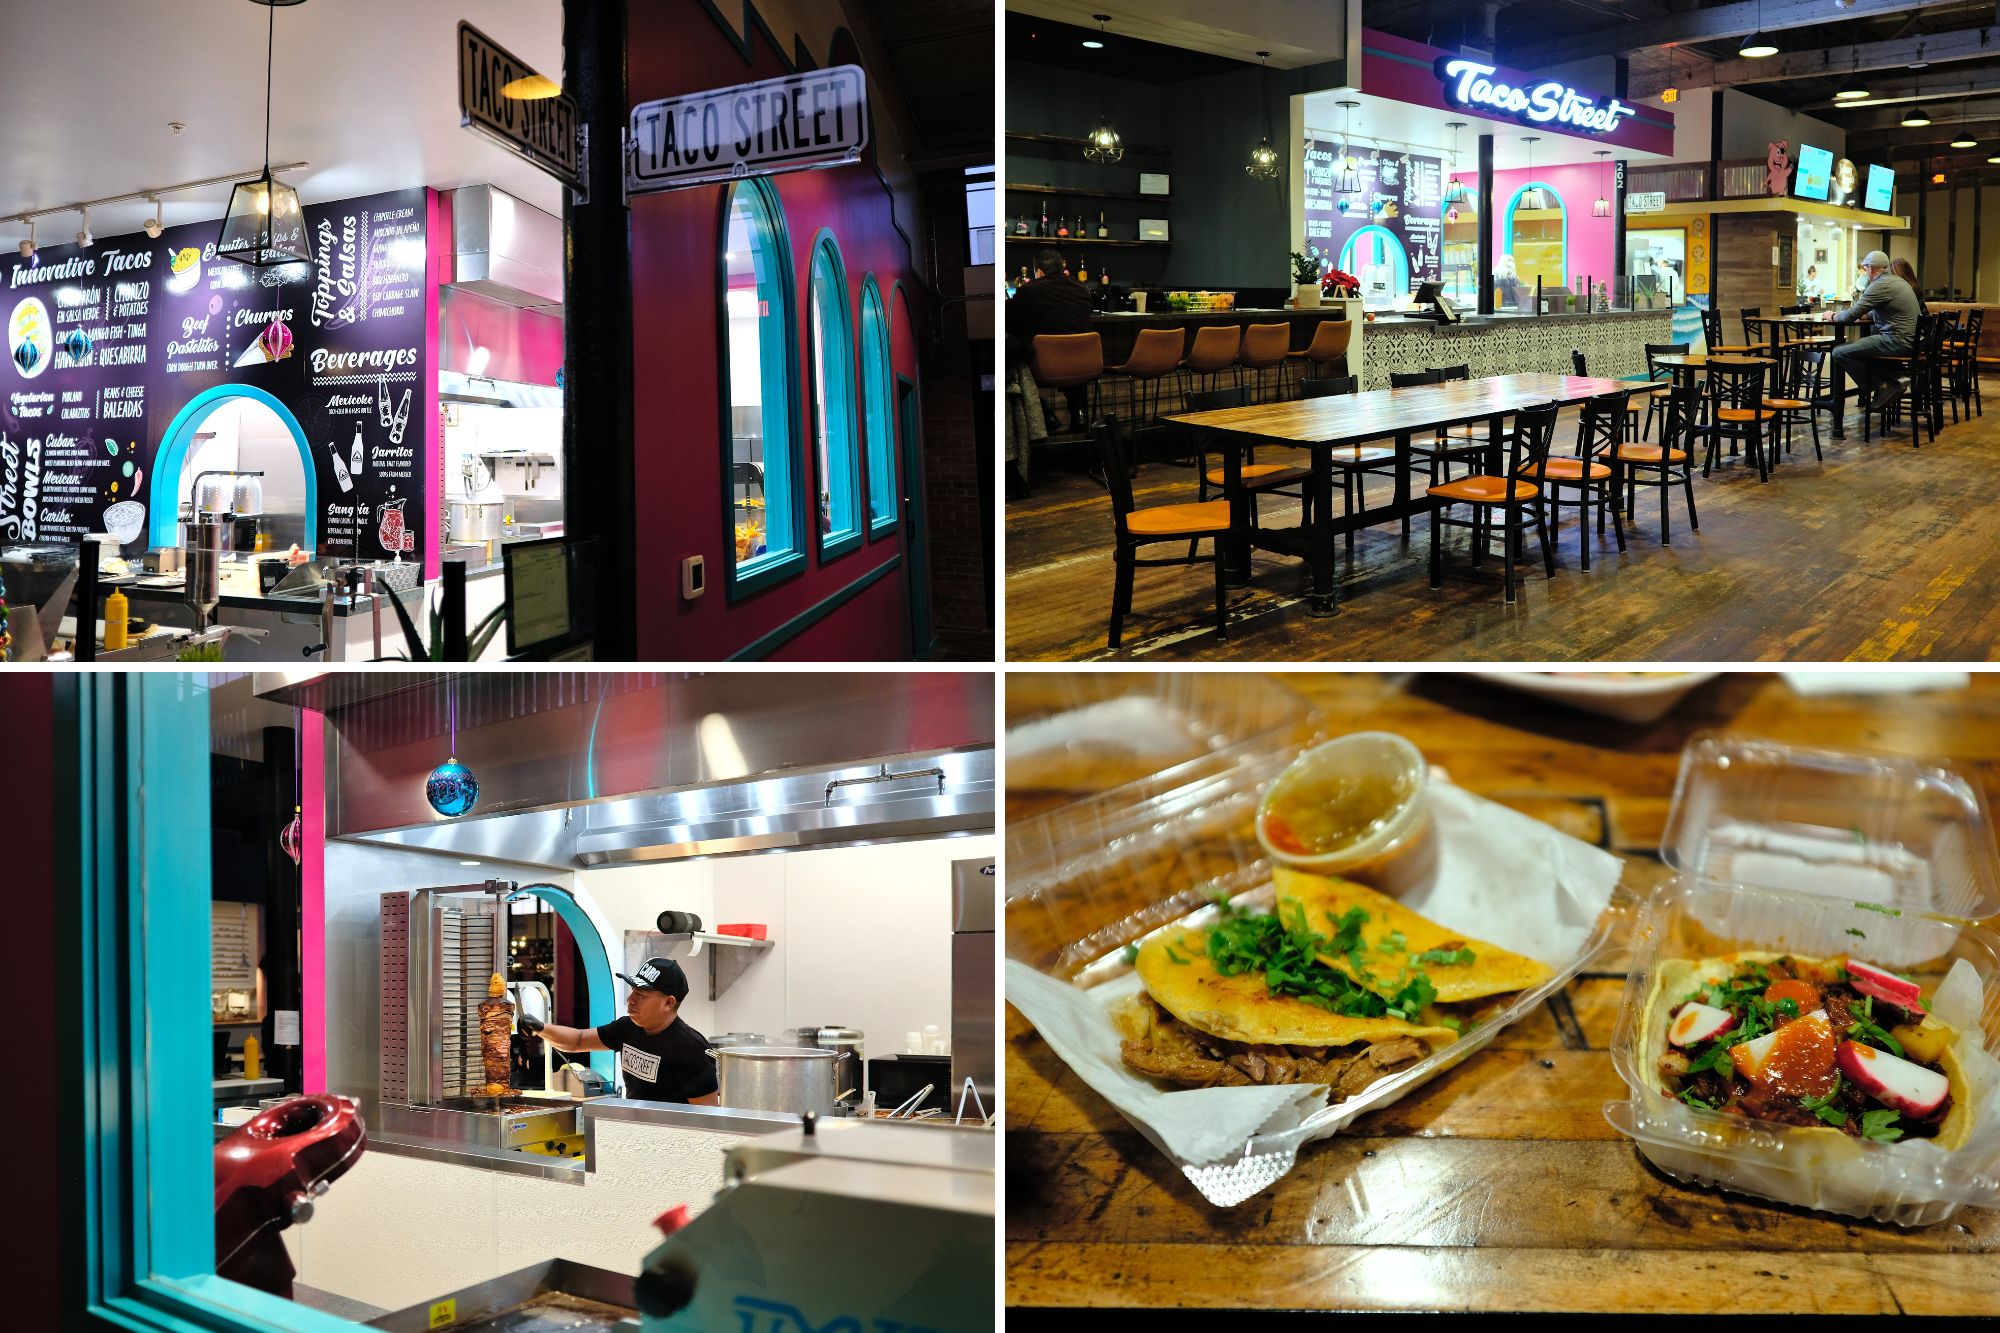 Collage of the kitchen and food from Taco Street in Concord